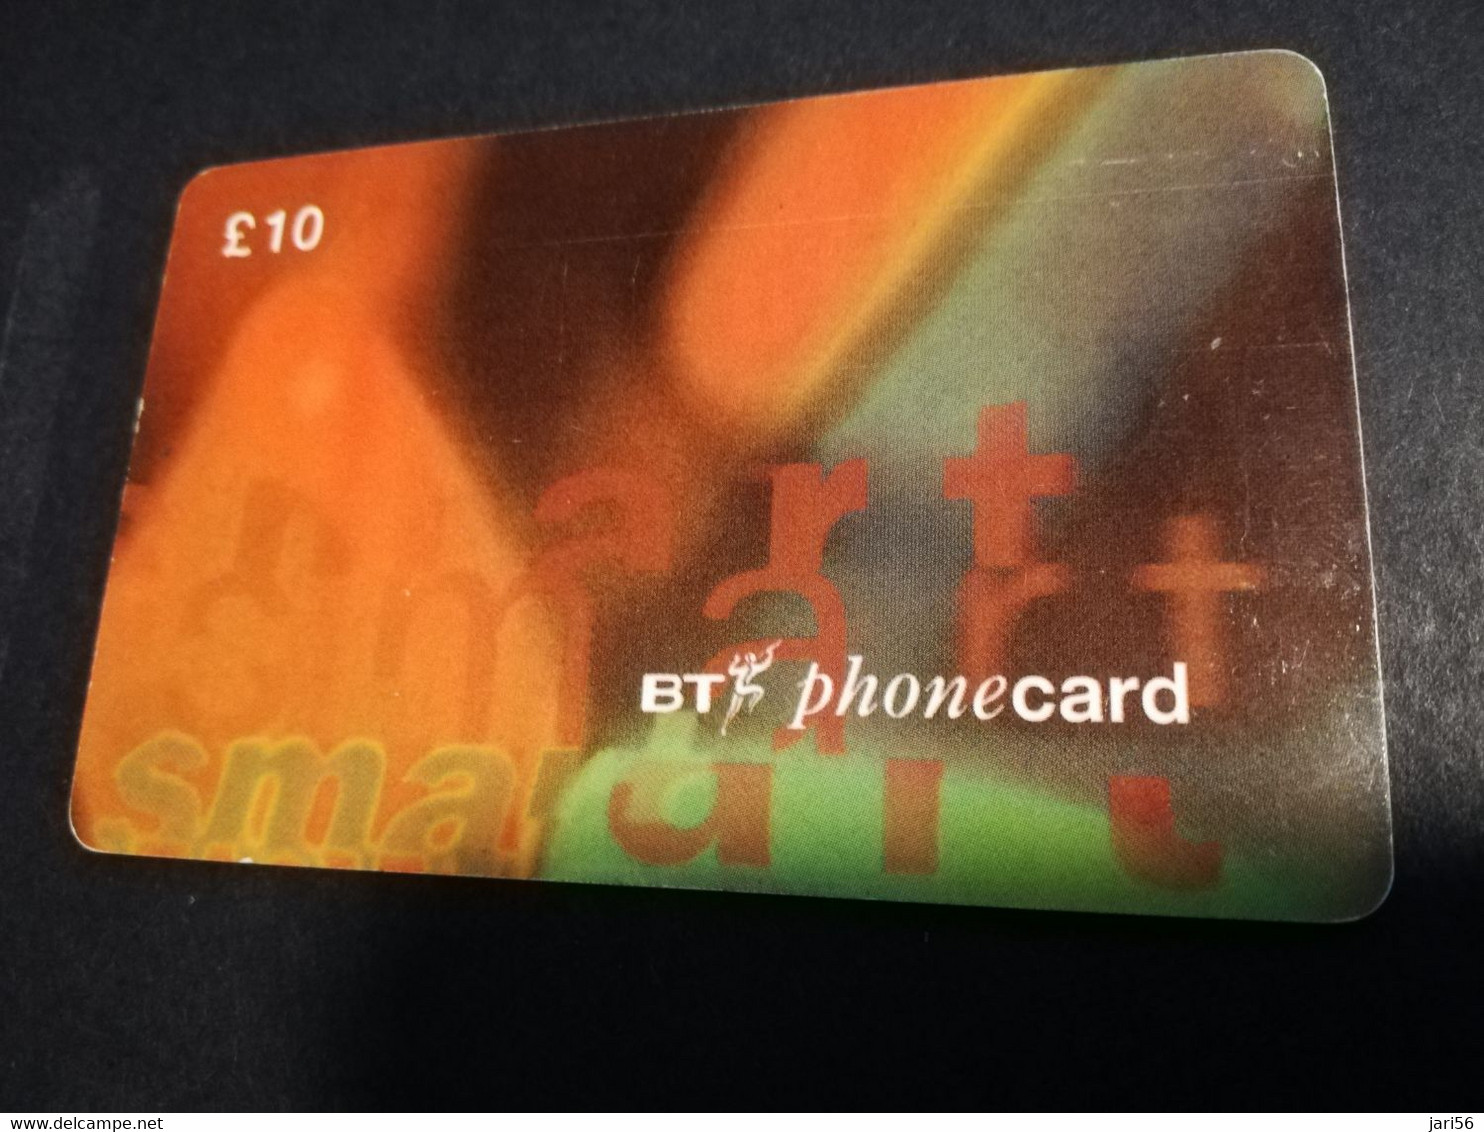 GREAT BRETAGNE  CHIPCARDS / TEST CARD 10 POUND    EXPIRY DATE 09/96   PERFECT  CONDITION     **4597** - BT Algemeen